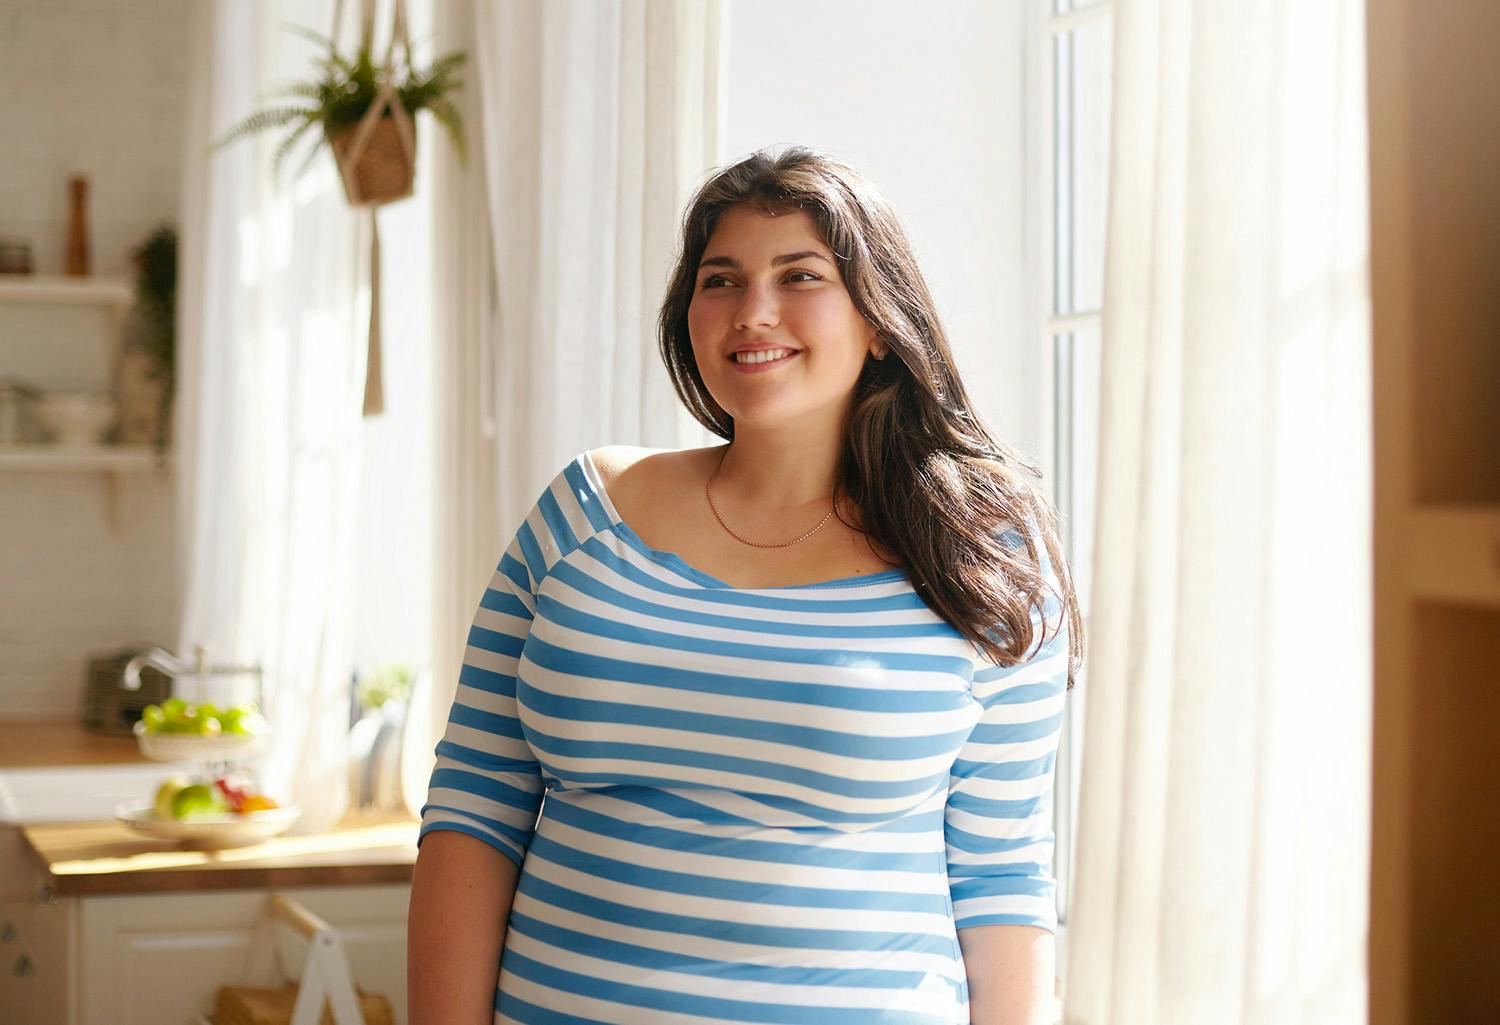 Woman in a striped shirt